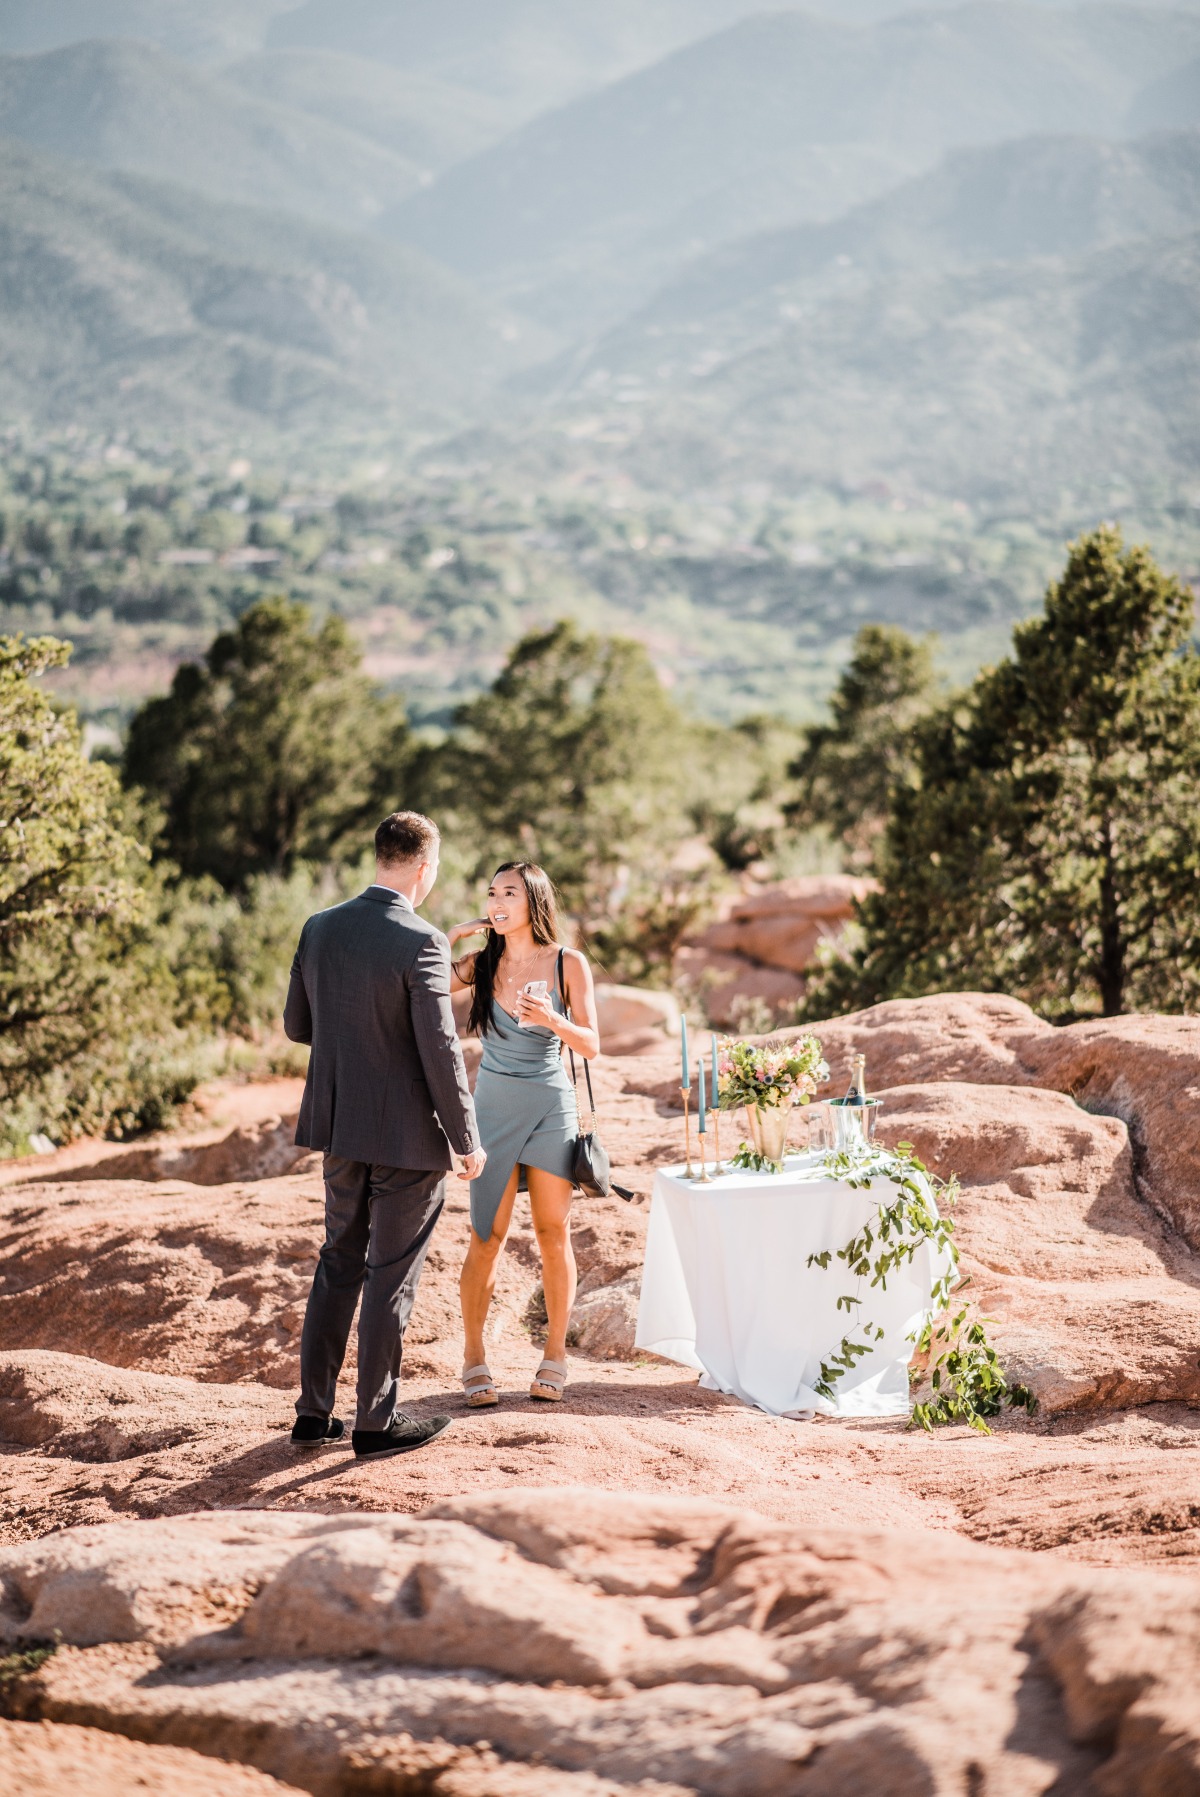 How to Have a Surprise Mountain Proposal in Colorado